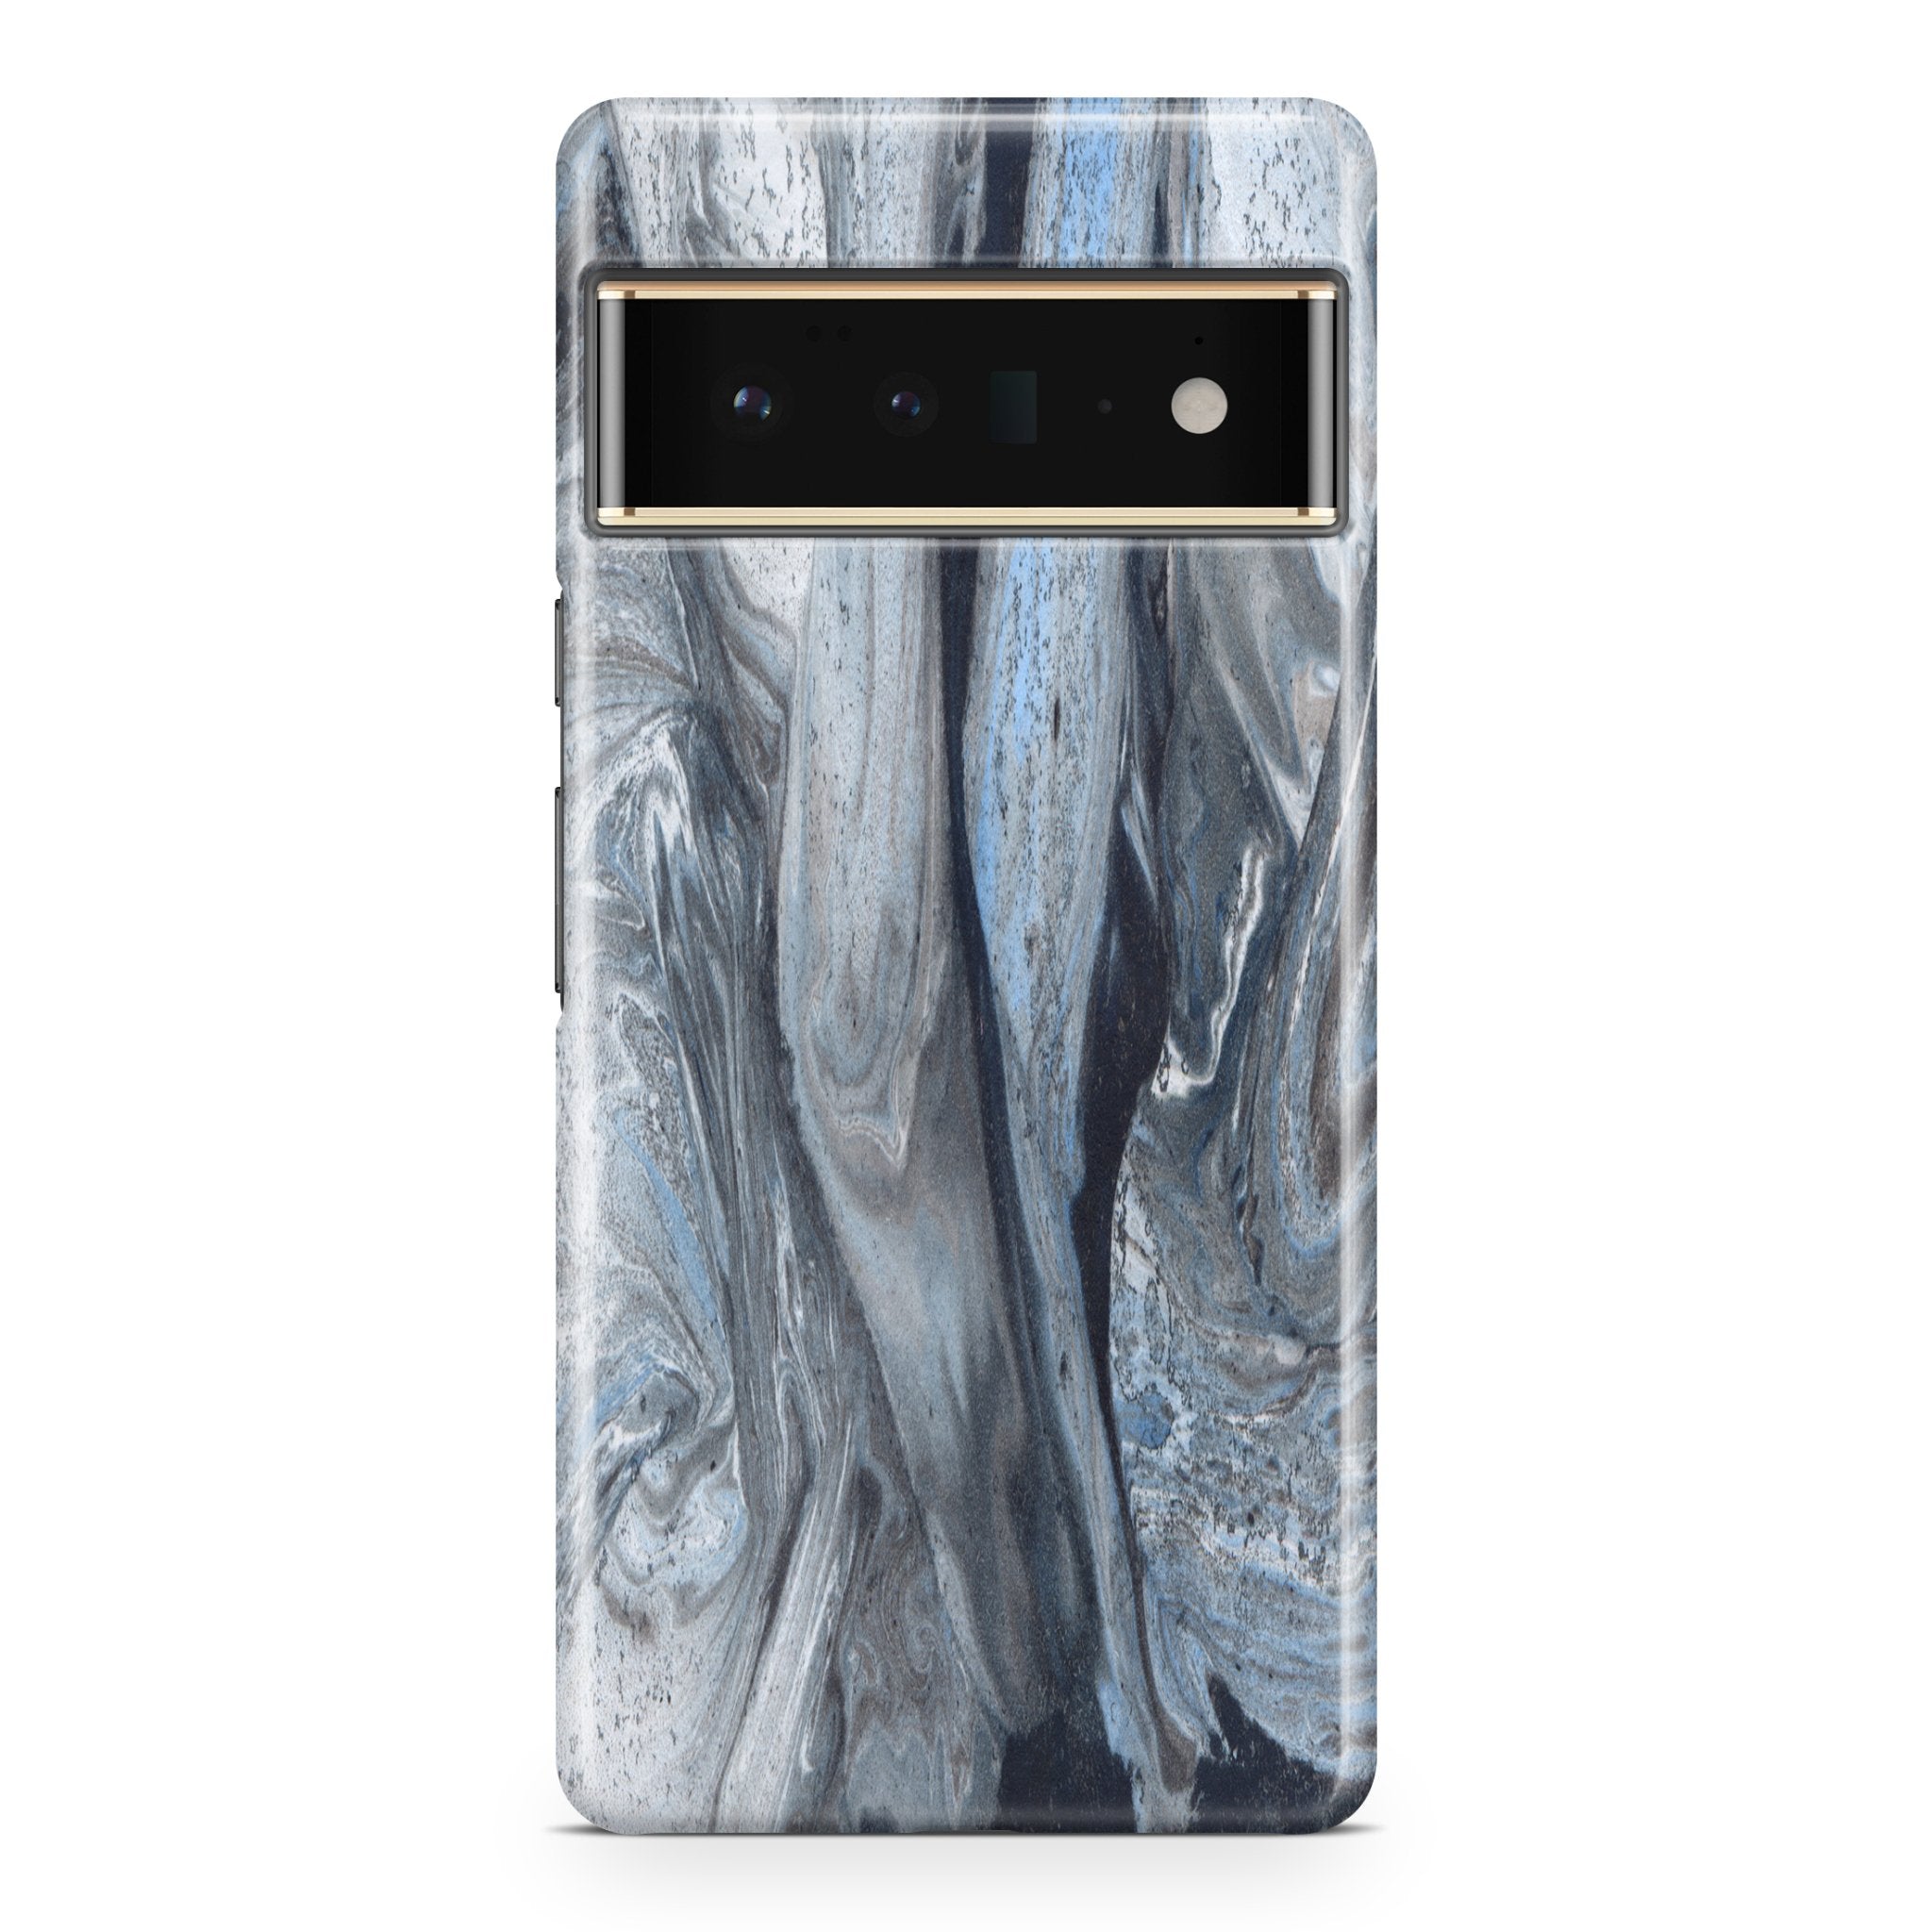 Black & White Marble Series II - Google phone case designs by CaseSwagger